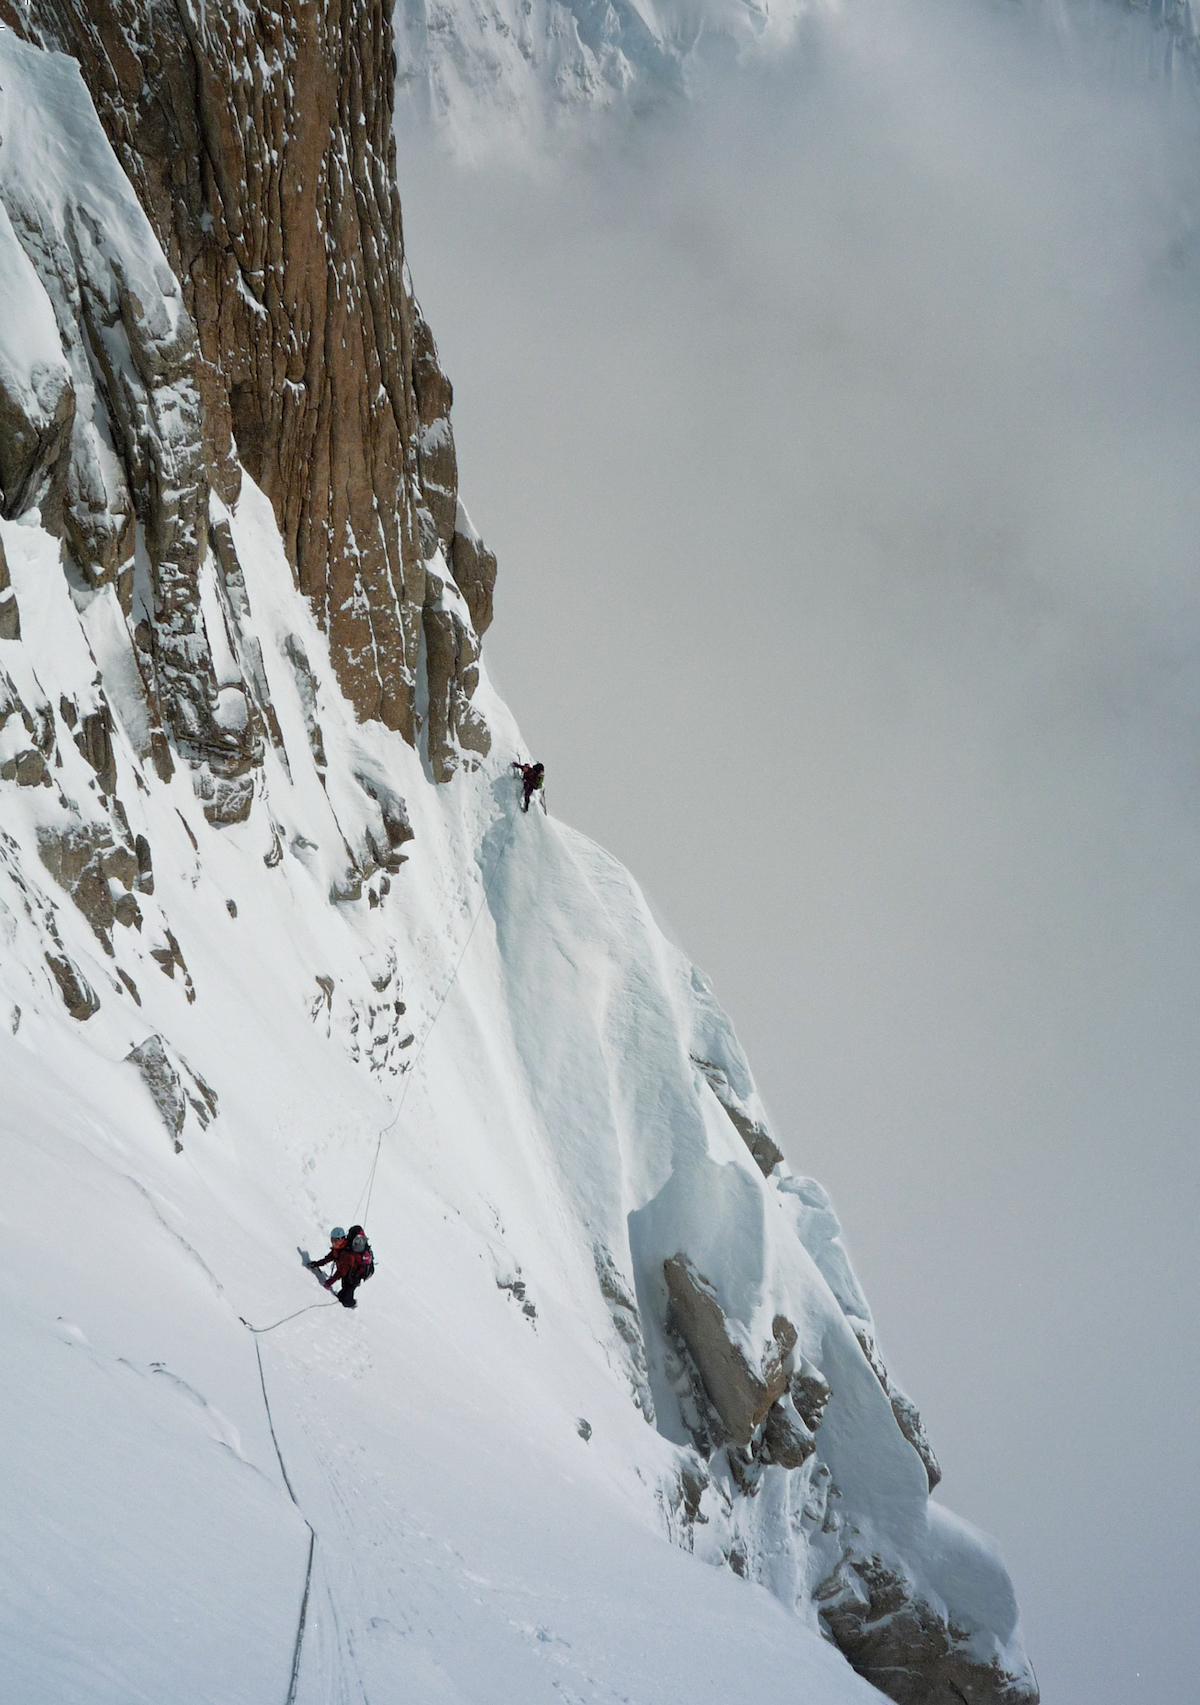 Ichimura (left) and Sato follow the upper section of the first rockband on Denali's Isis Face. The climbers simulclimbed the entire route in three days, one of which was spent in a snow cave waiting out a storm. [Photo] Katsutaka Yokoyama